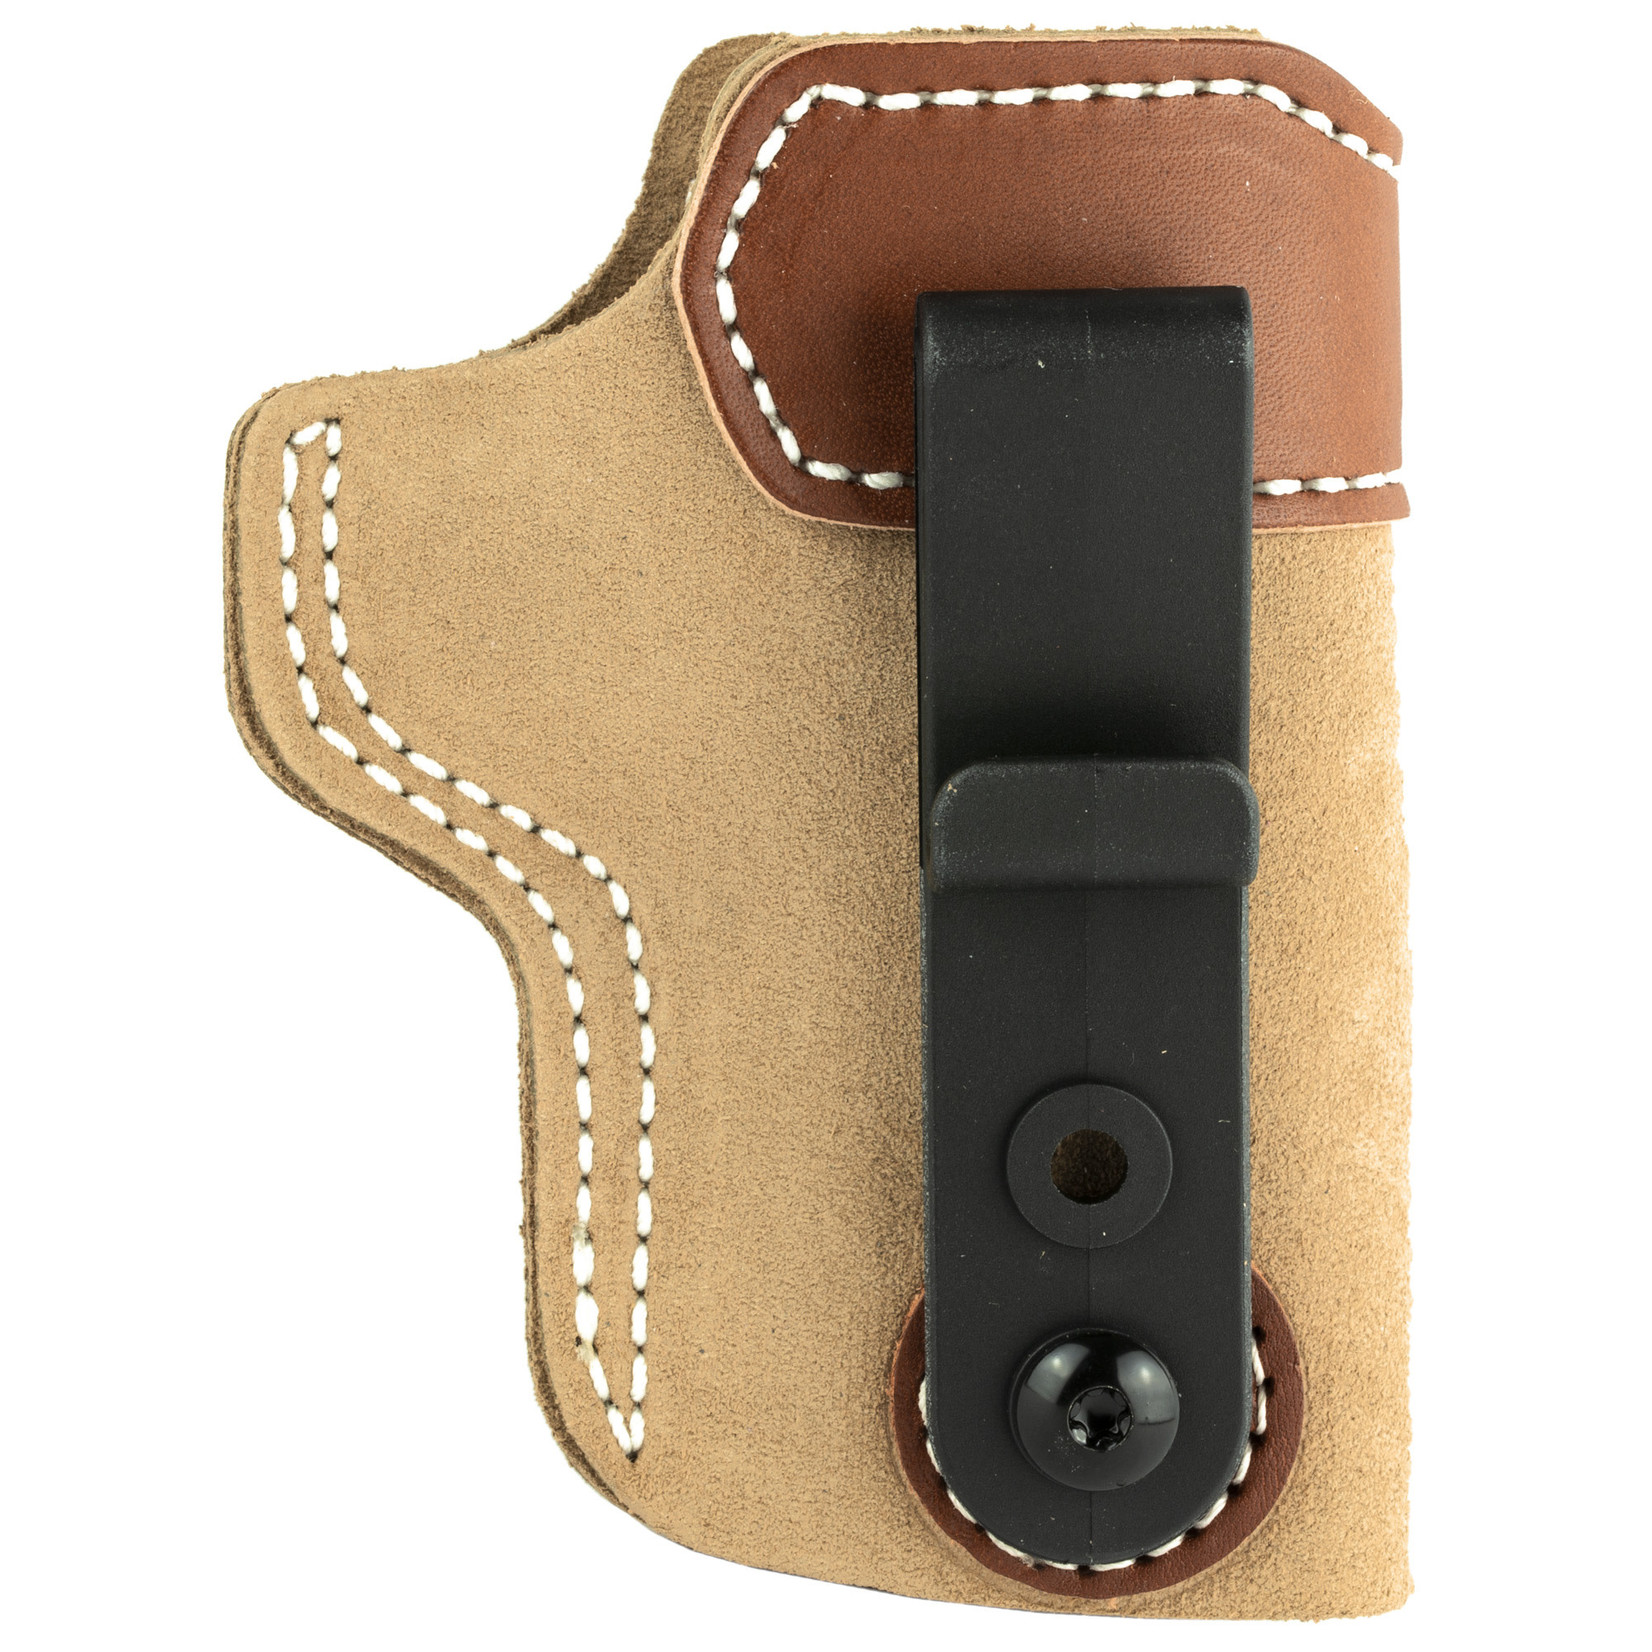 DeSantis DeSantis Gunhide, Sof-Tuck Inside The Pant Holster, Fits 1911 With 3" Barrel, Right Hand, Tan Leather